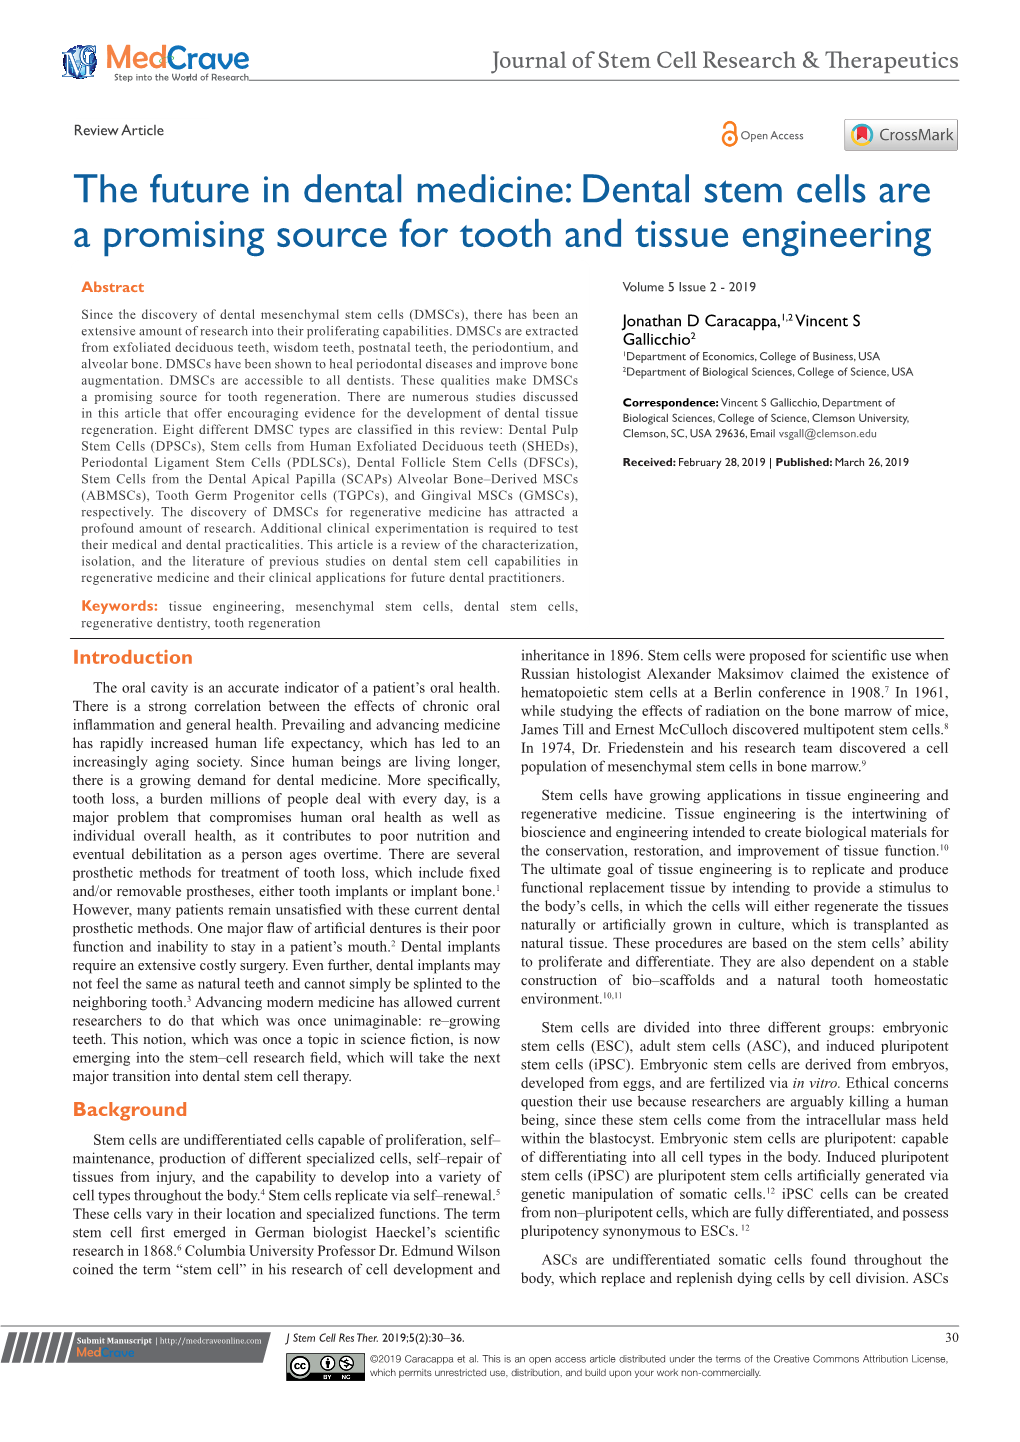 The Future in Dental Medicine: Dental Stem Cells Are a Promising Source for Tooth and Tissue Engineering